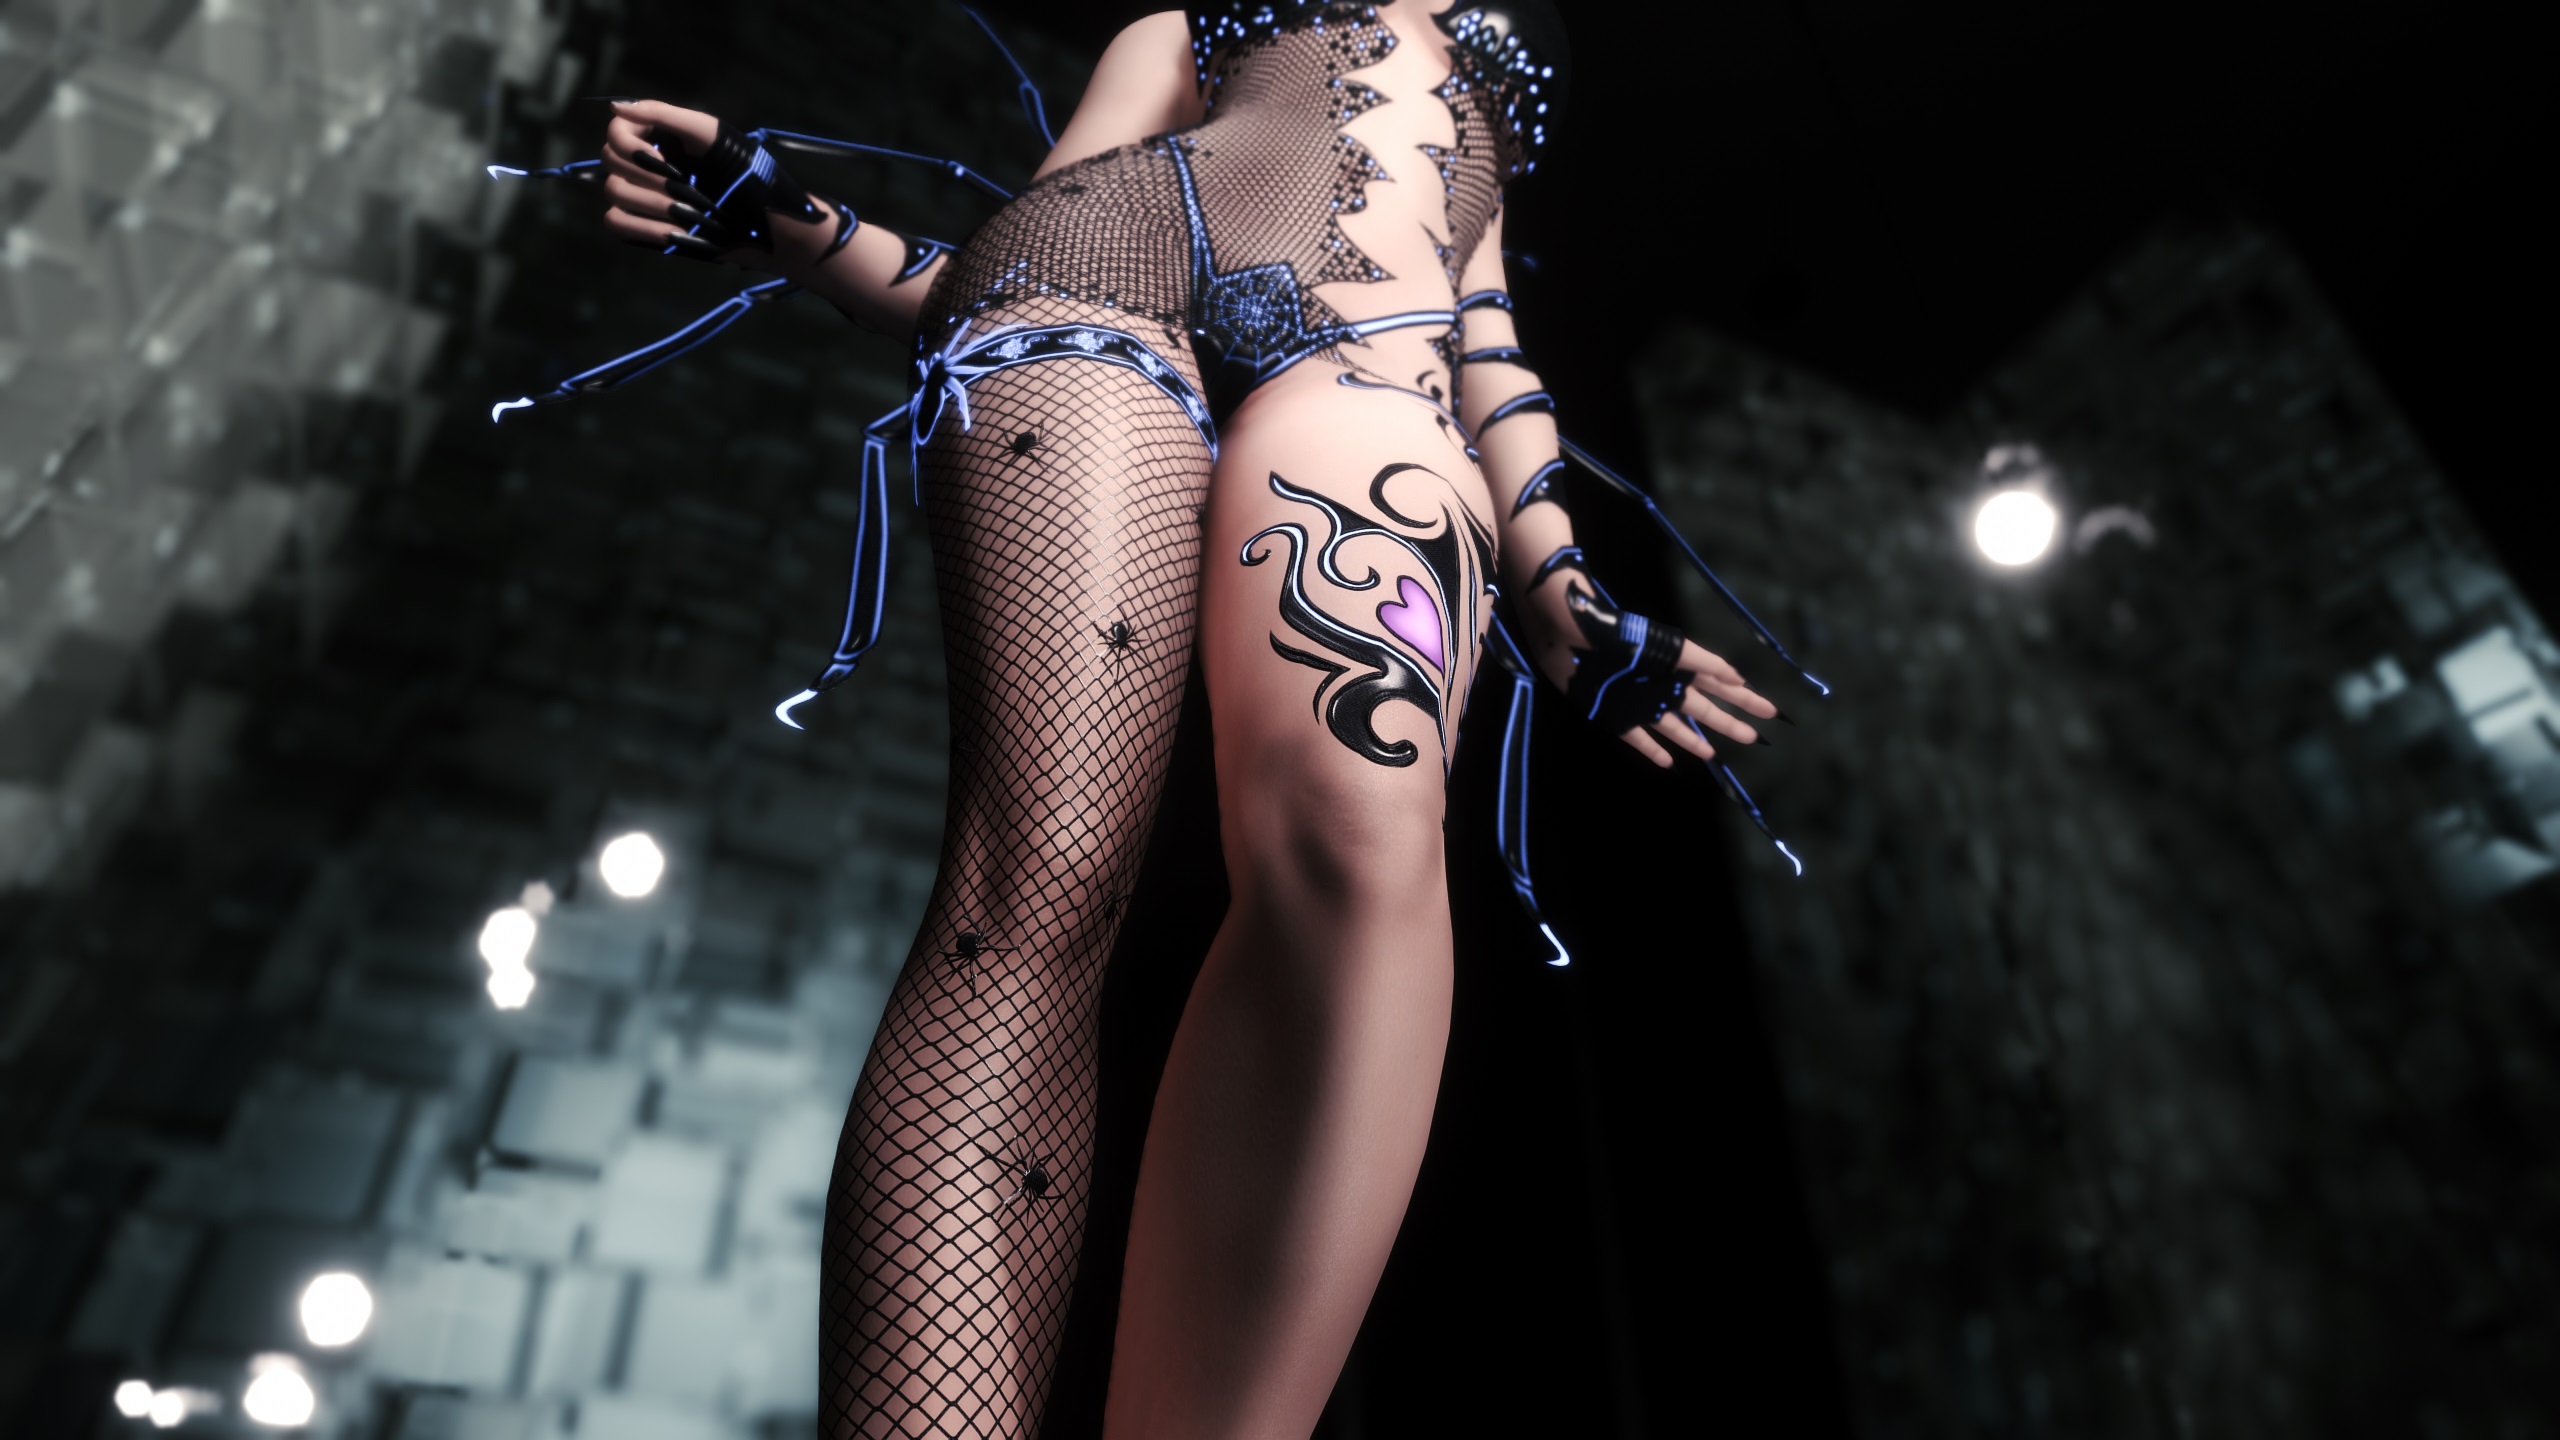 dx black widow outfit sse cbbe bodyslide with physics 鎧アーマー